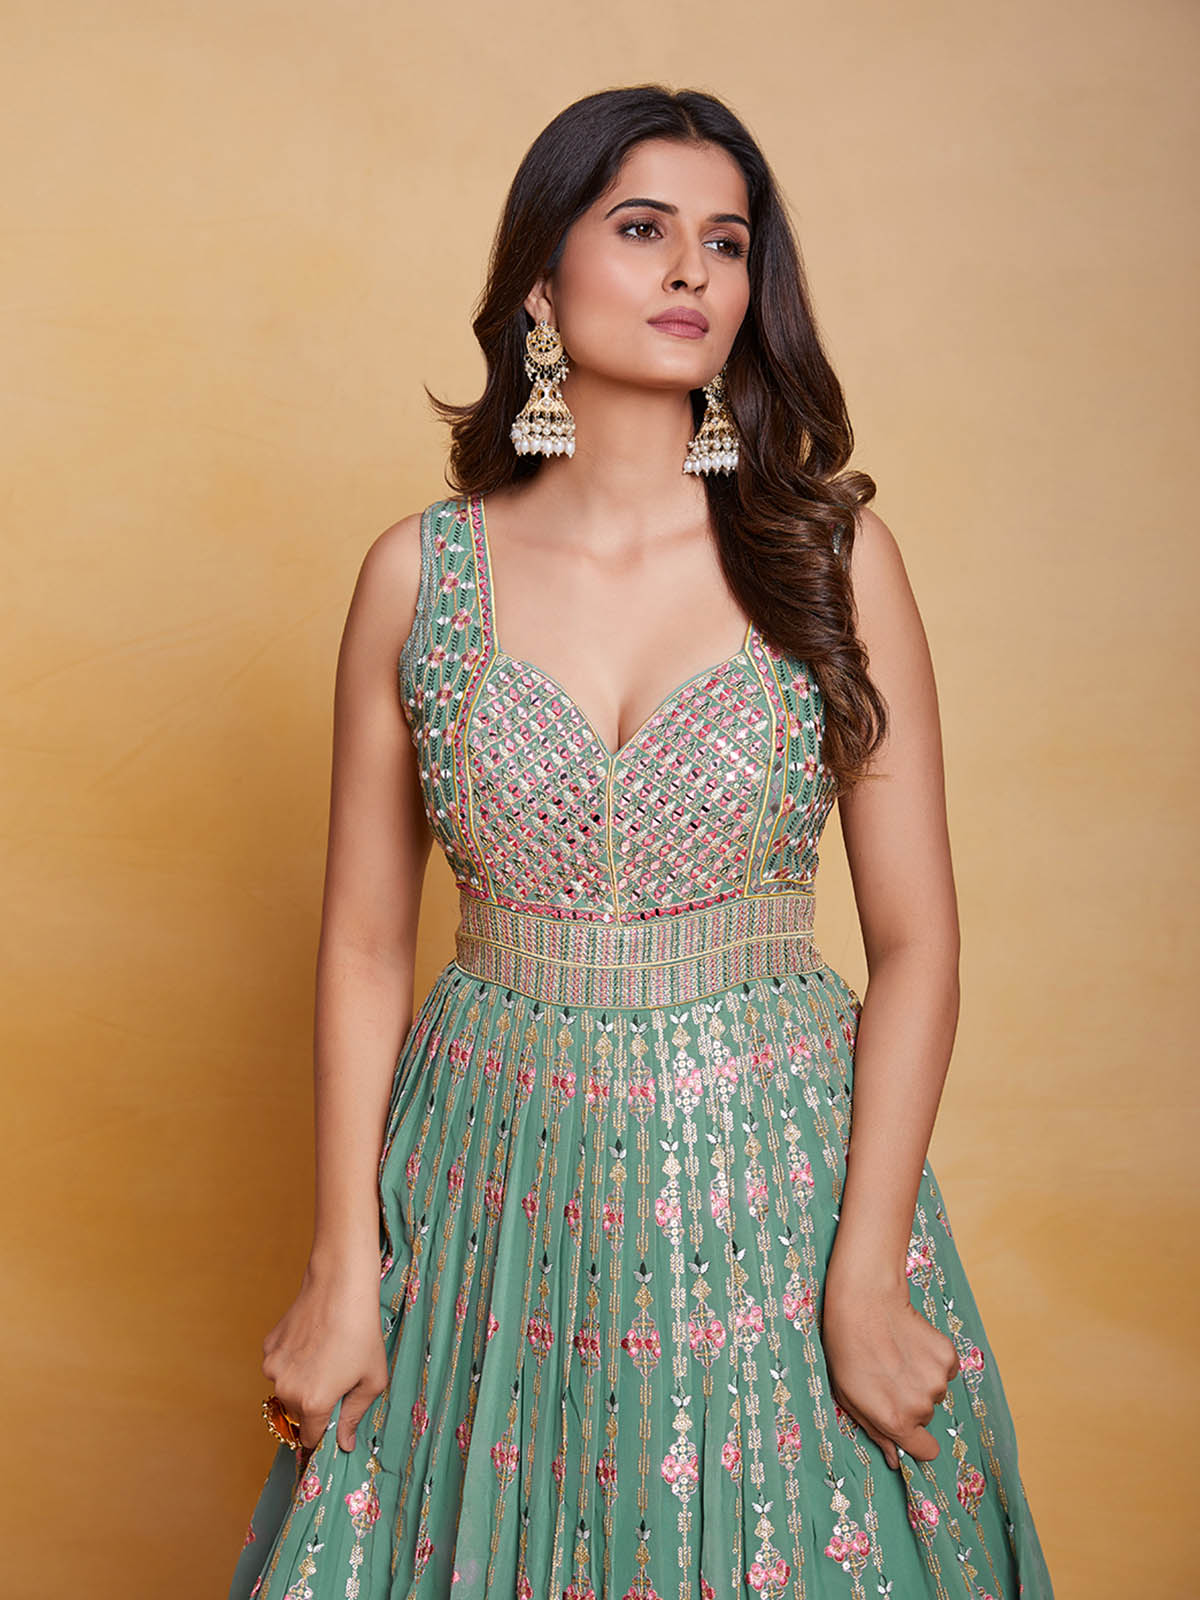 Sea Green Anarkali Dress for Wedding 2022|eid special dress 2022 for girl  in india